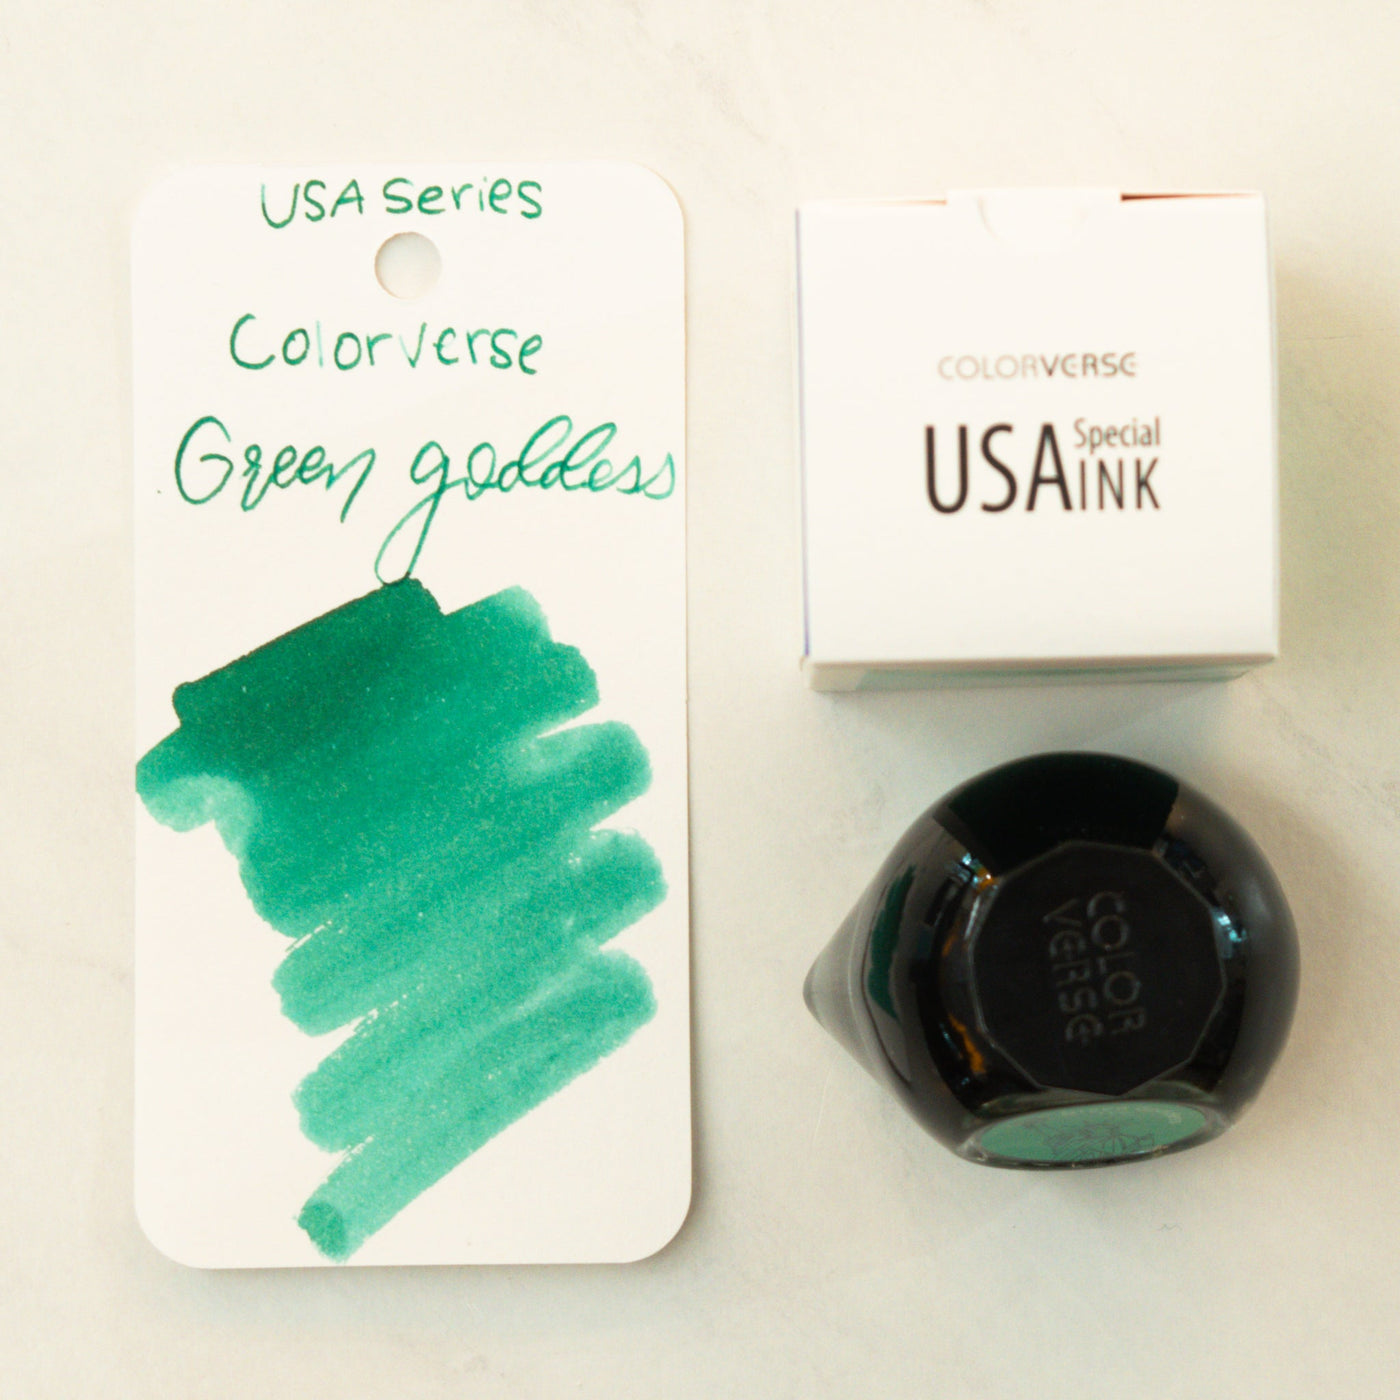 Colorverse New York Fountain Pen Ink